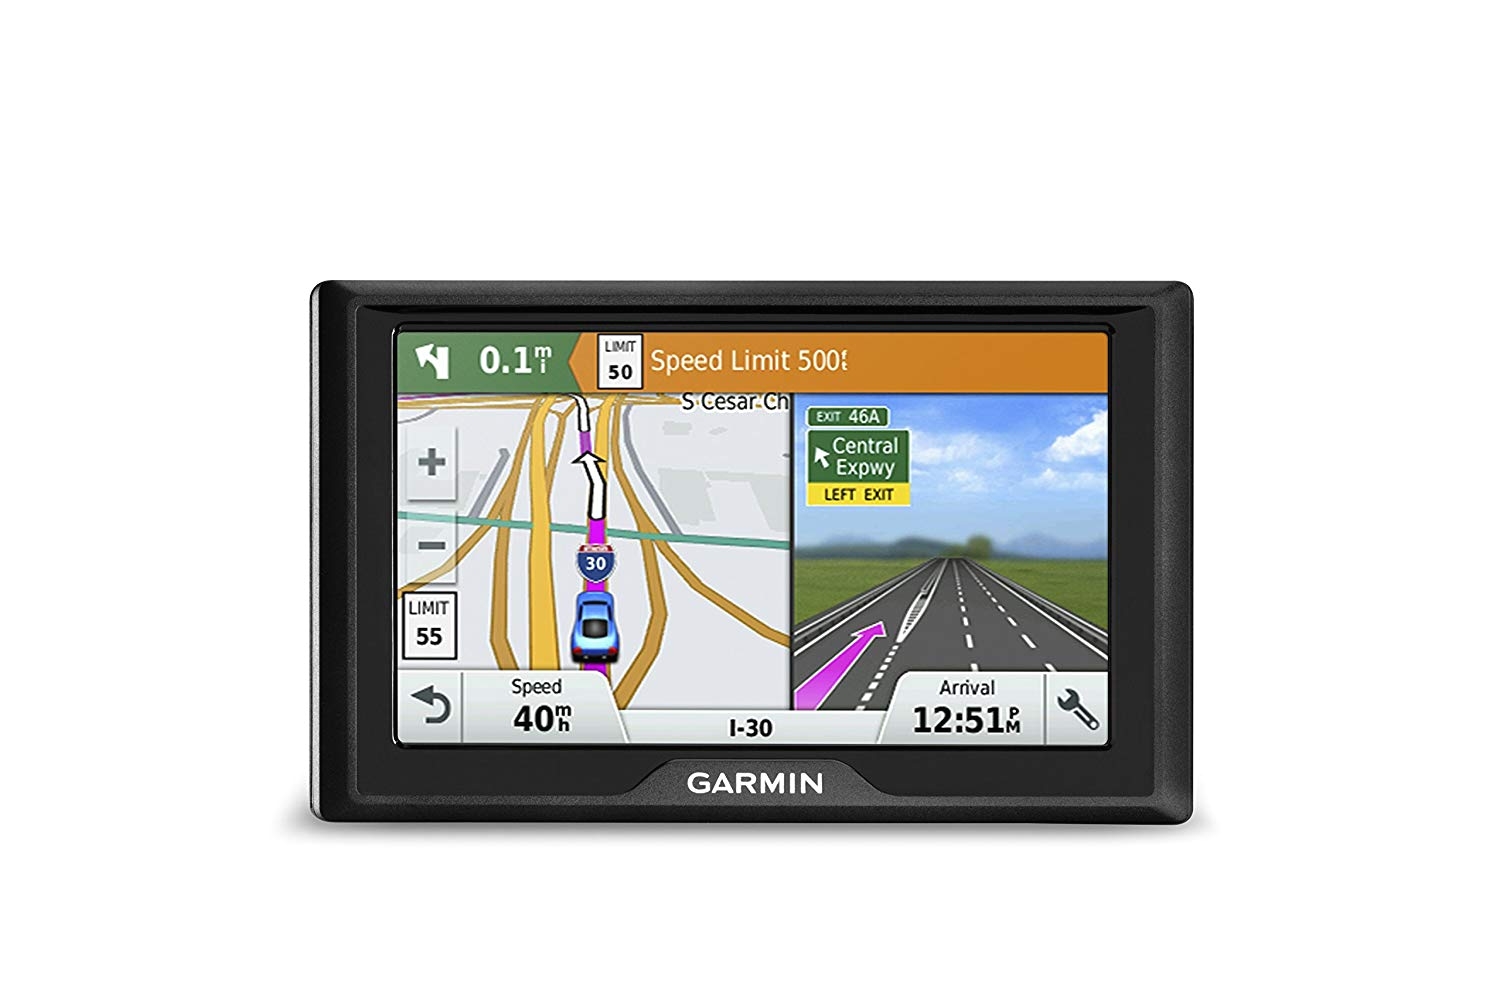 amazon com garmin drive 50 usa gps navigator system with spoken turn by turn directions direct access driver alerts and foursquare data cell phones